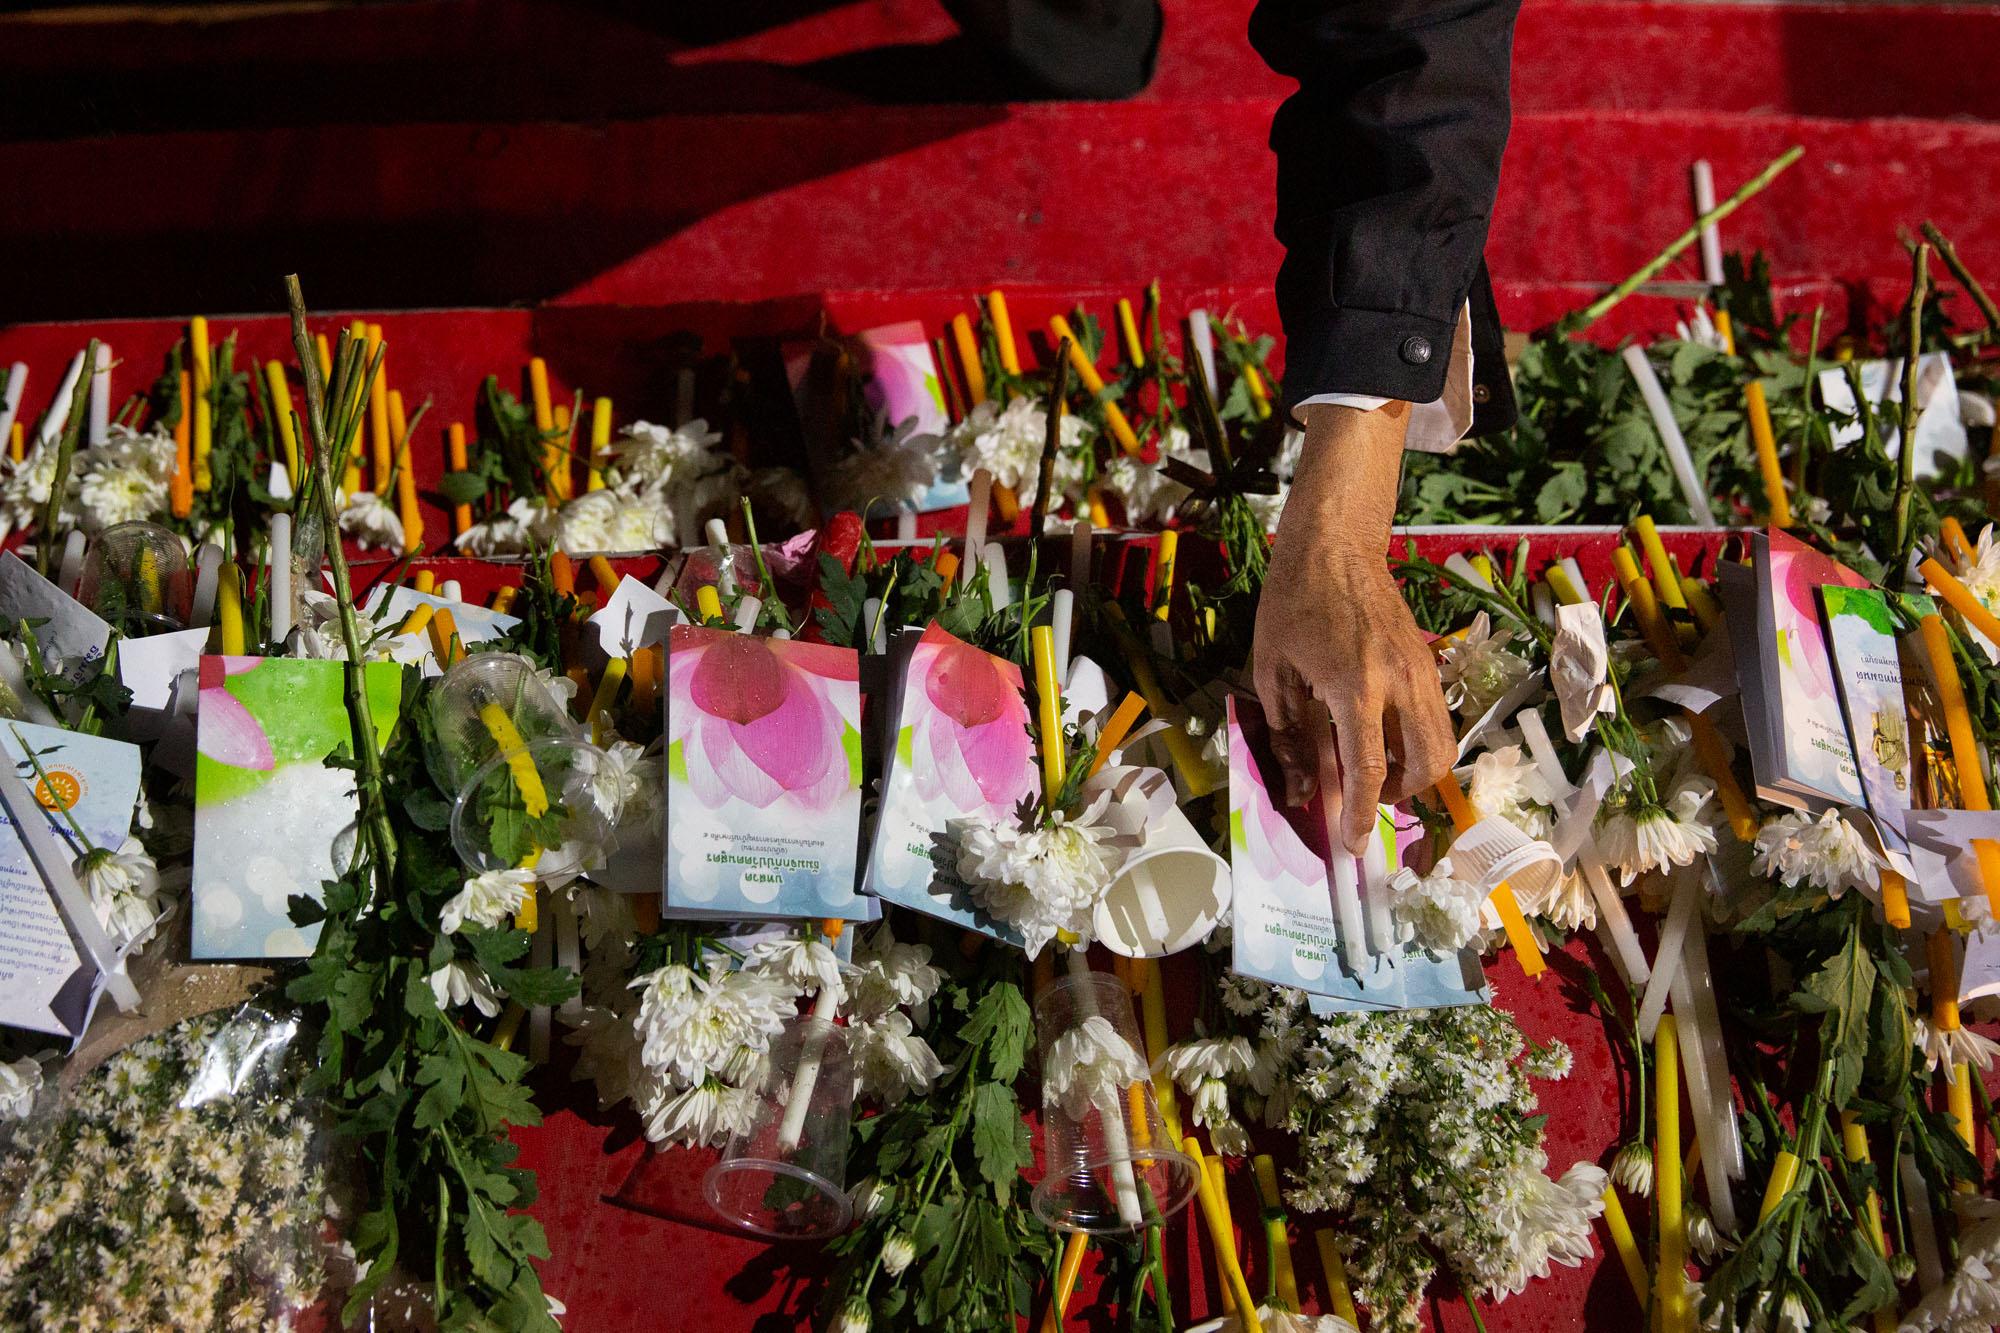 Shooting in Korat, Thailand: The New York Times - A man places a candle during a memorial for those killed...